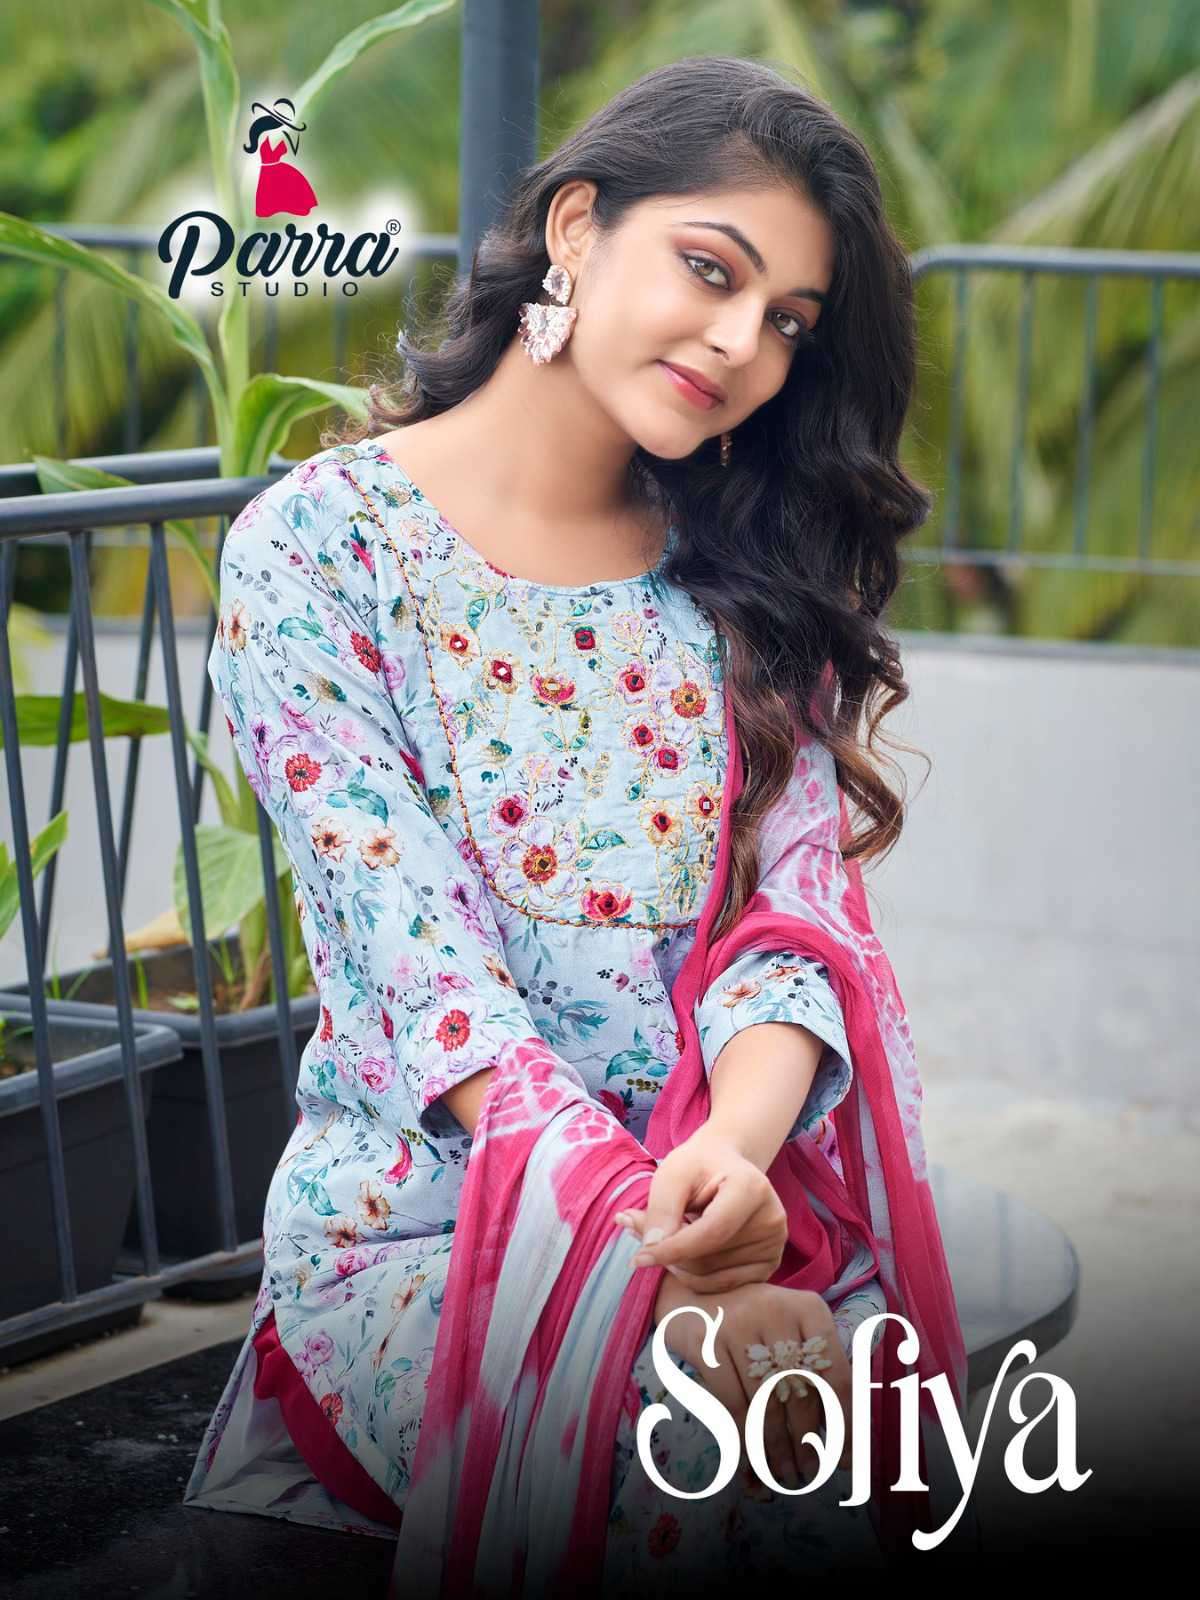 Parra Studio Sofiya Vol 1 Fancy Muslin Afghnai Suit Latest New Designs Outfit